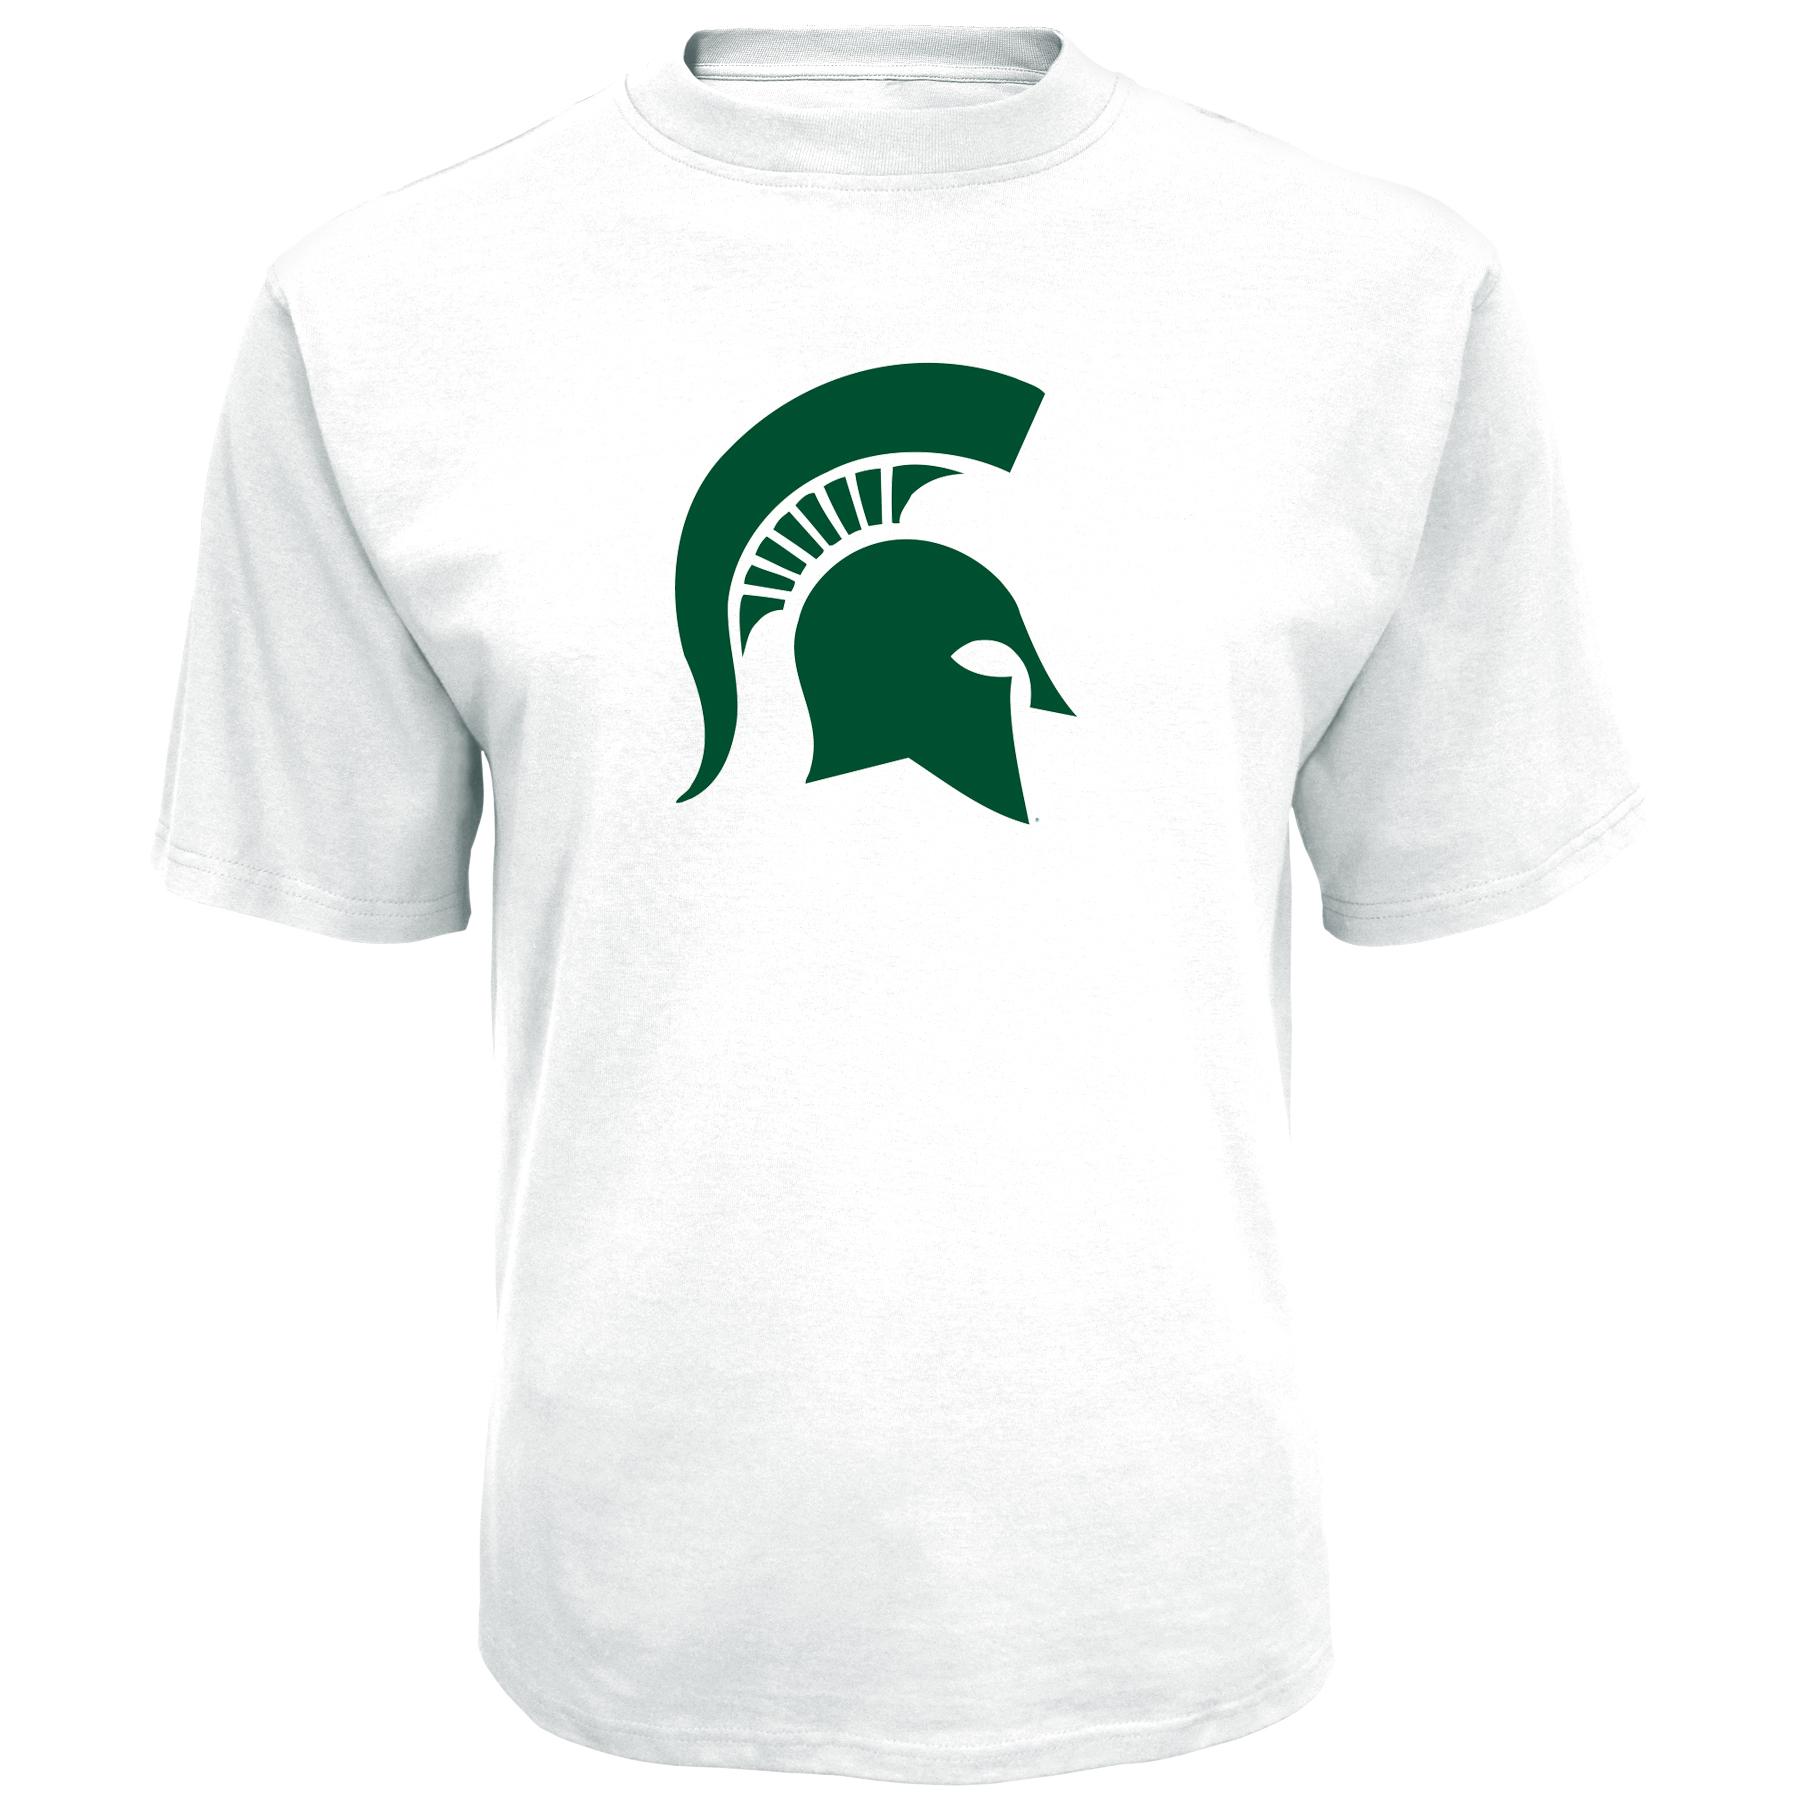 NCAA Men's Graphic T-Shirt - Michigan State Spartans